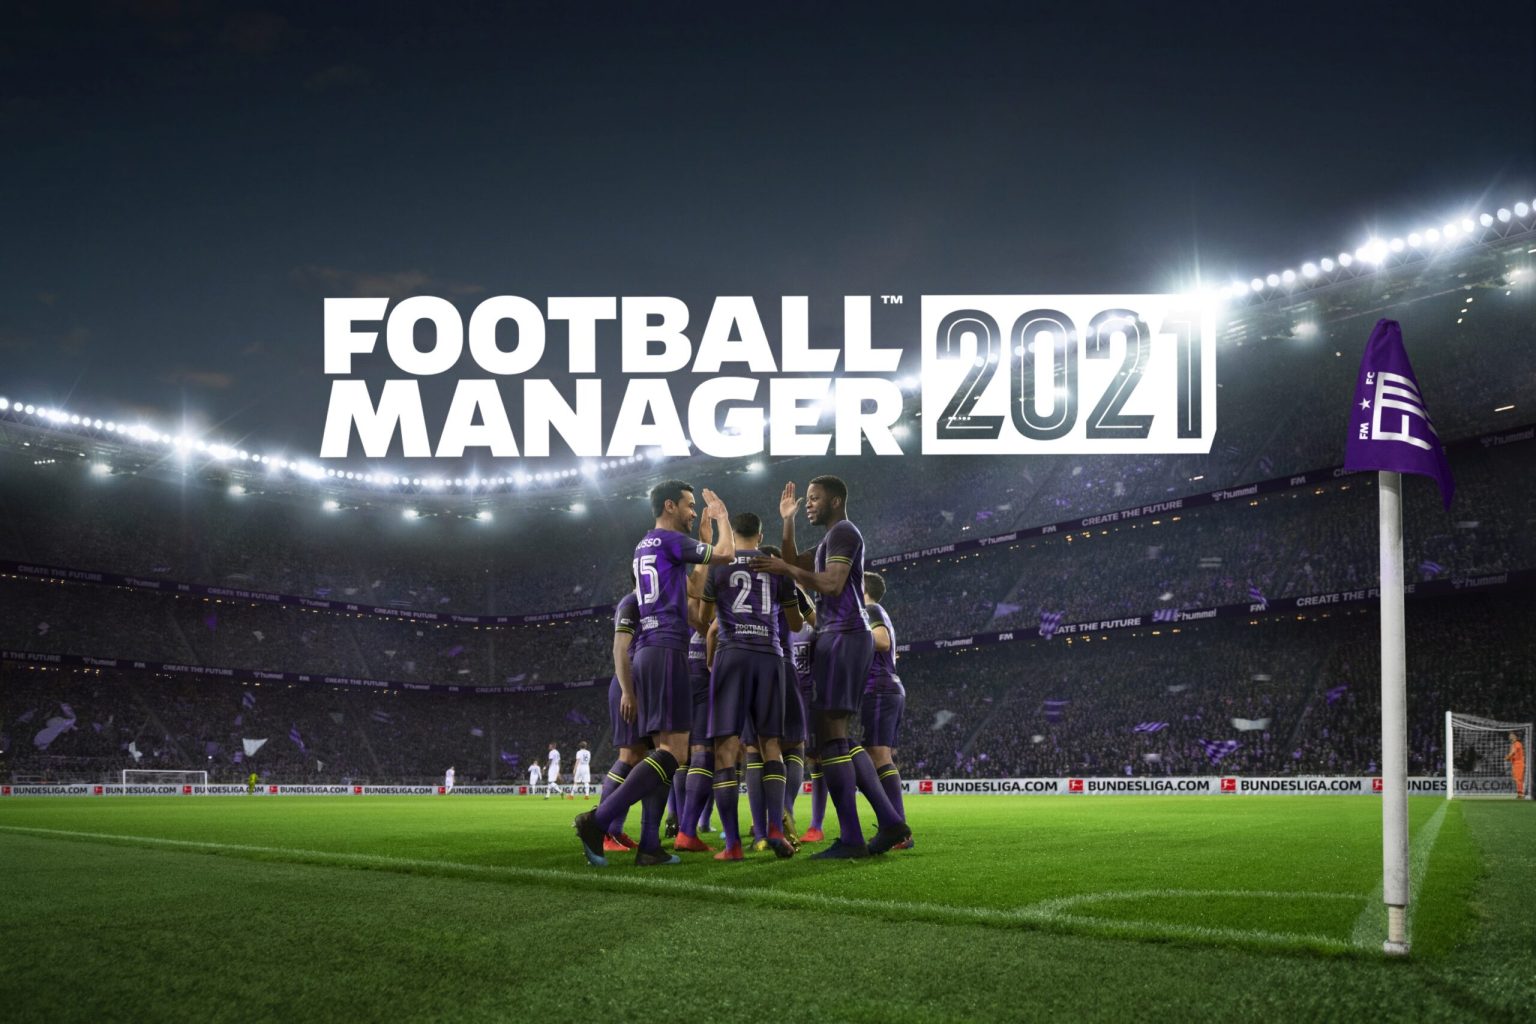 Football Manager 2021 Date Announced 01 Header scaled 2afb 1536x1024 - Soccer Manager 2021 Mod Apk V2.1.1 (English Version)